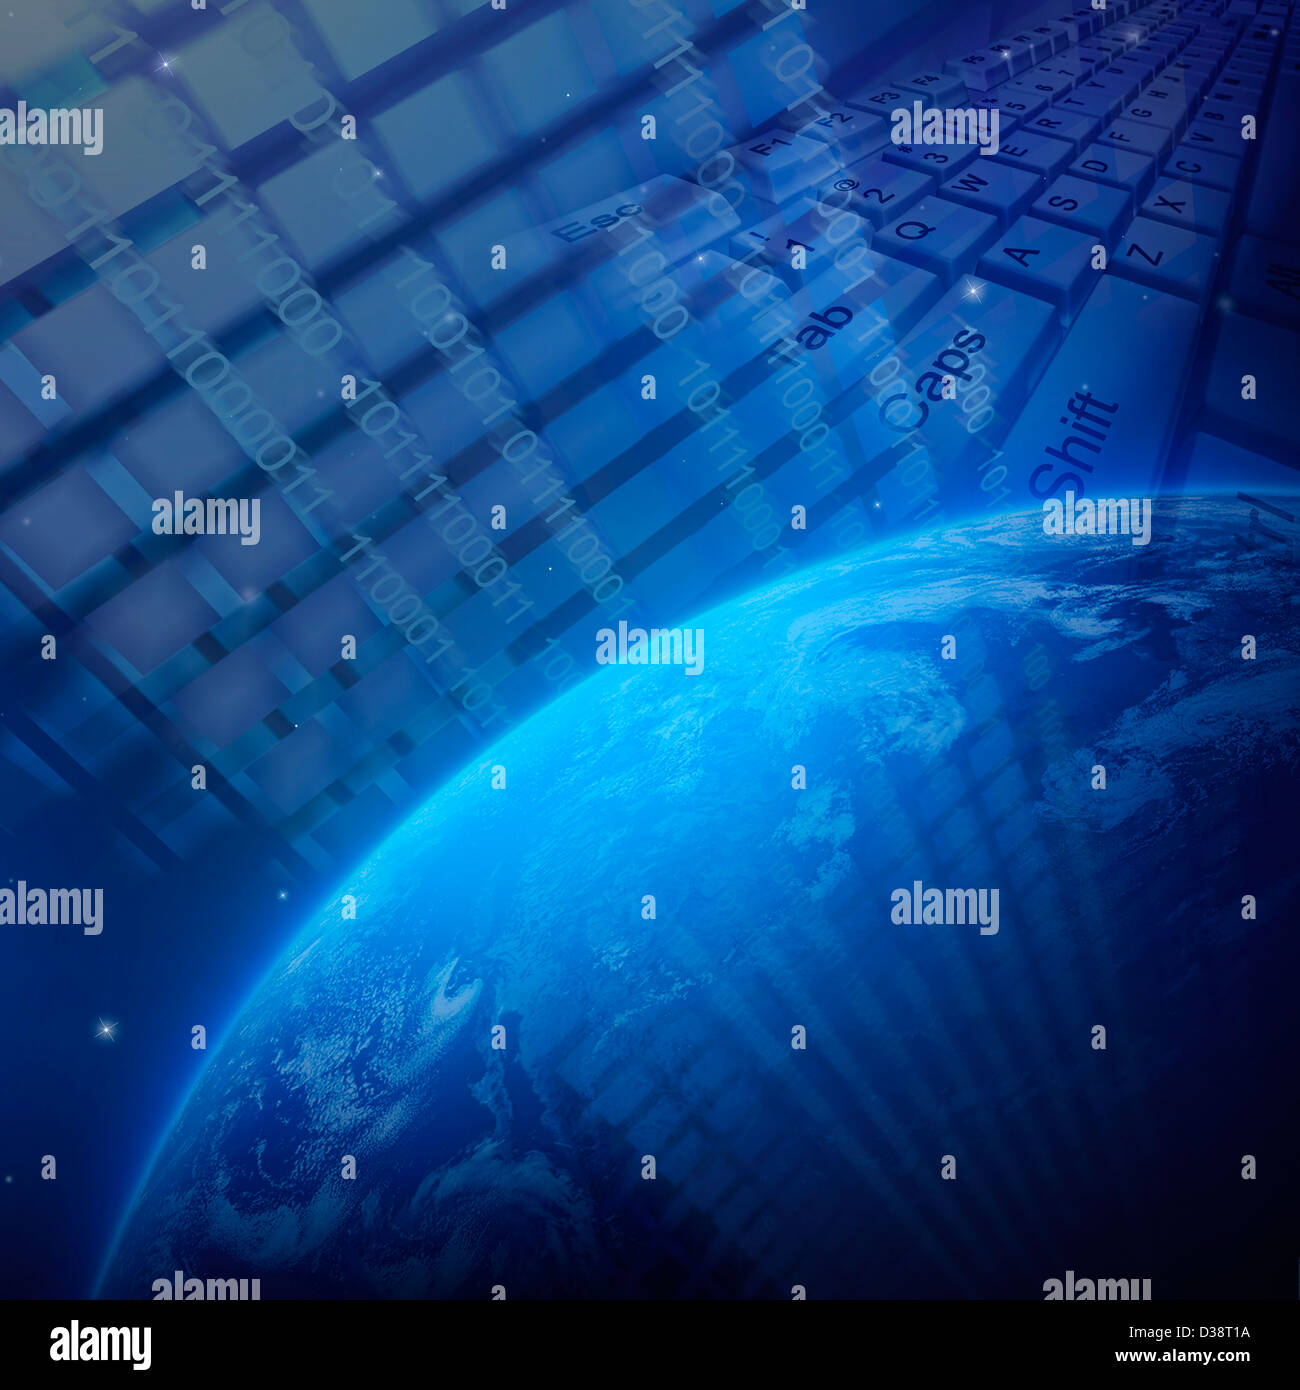 illustration of planet earth and networking Stock Photo